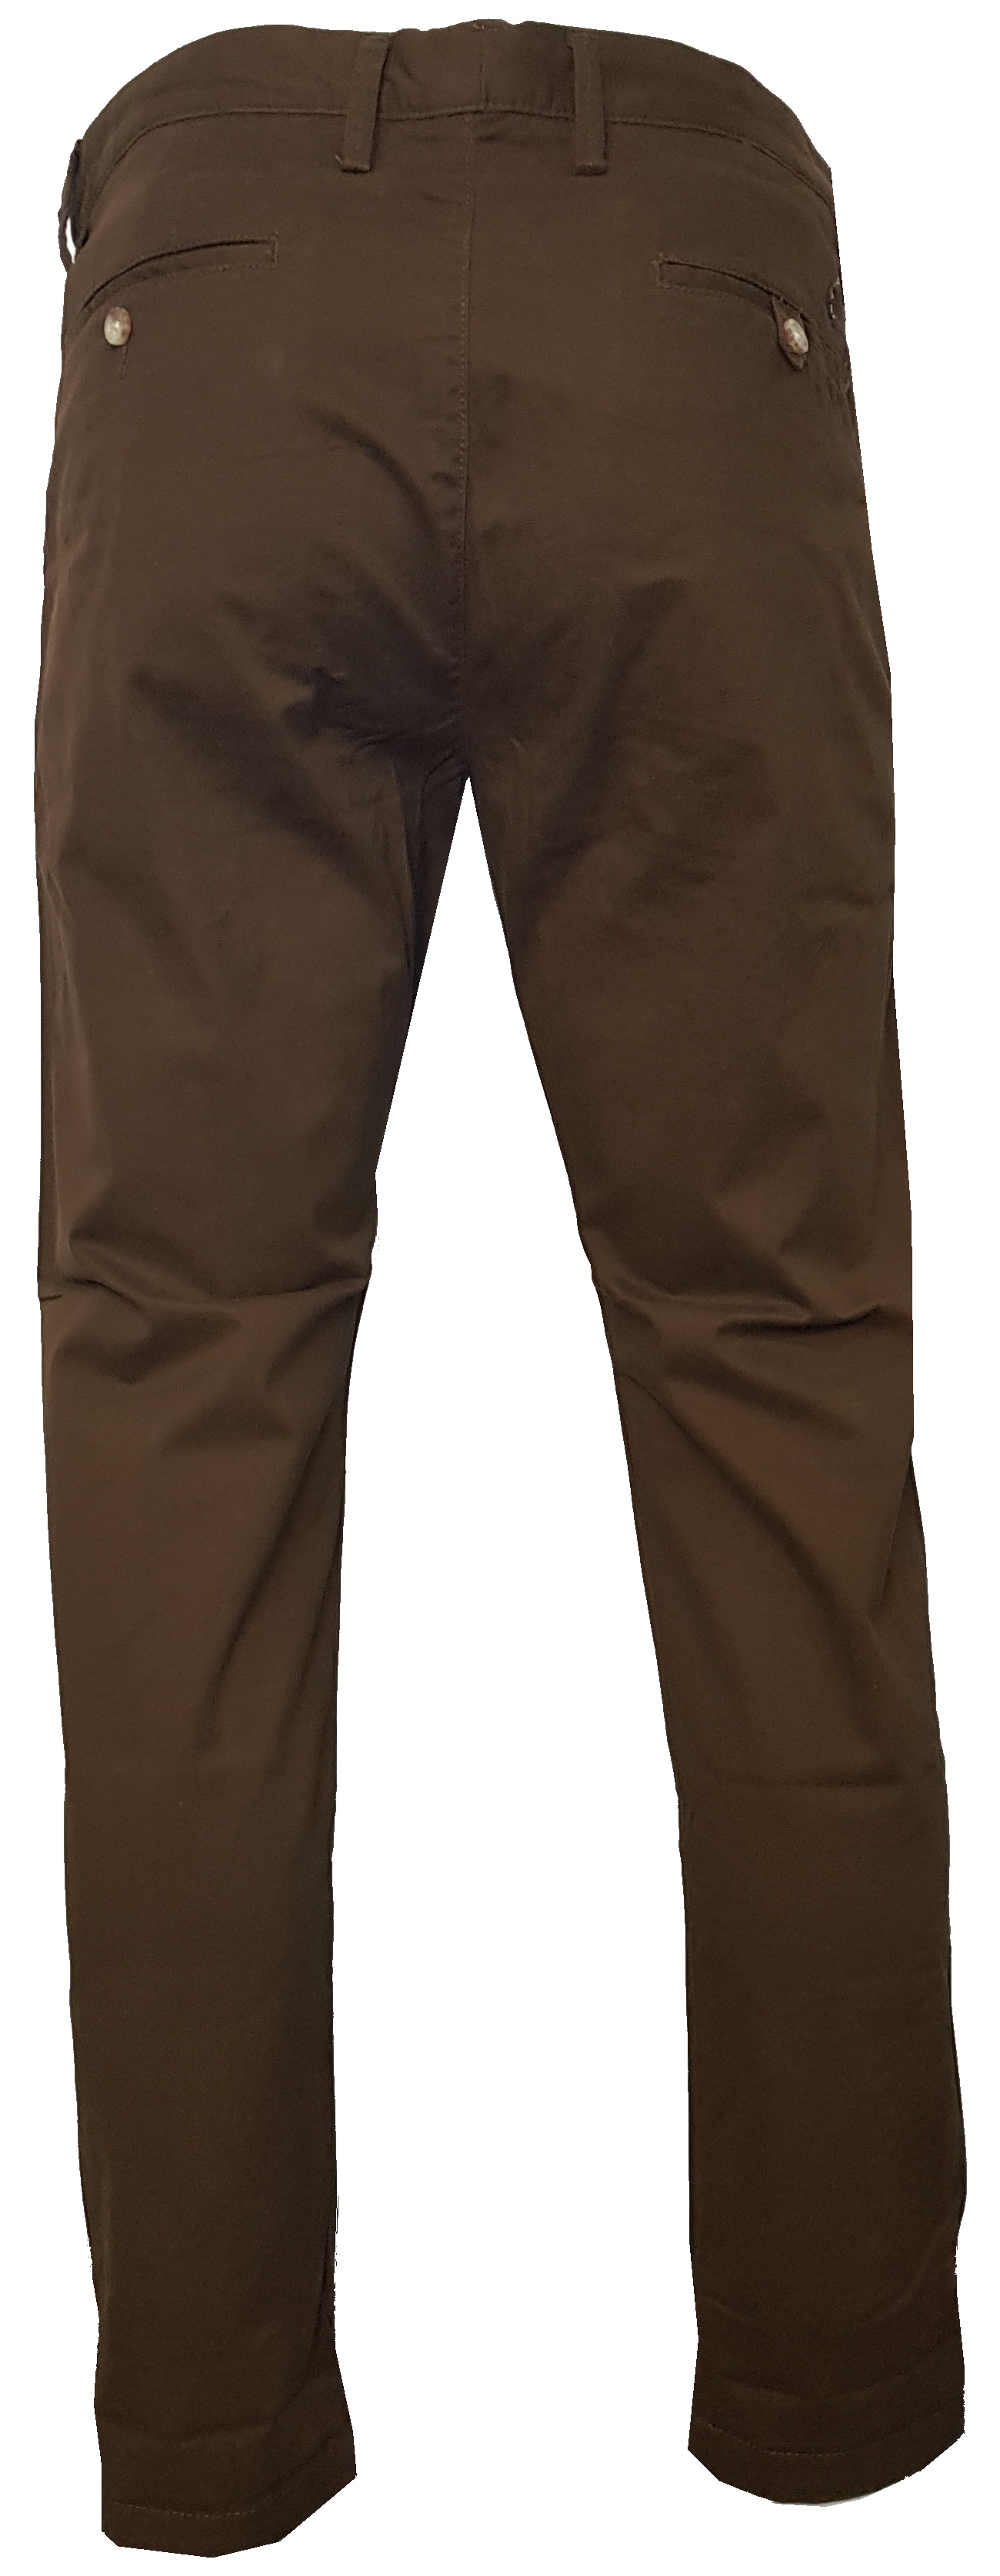 Ralph Lauren Chino Trousers. Stretch Preston Pants in Brown - INTOTO7 ...